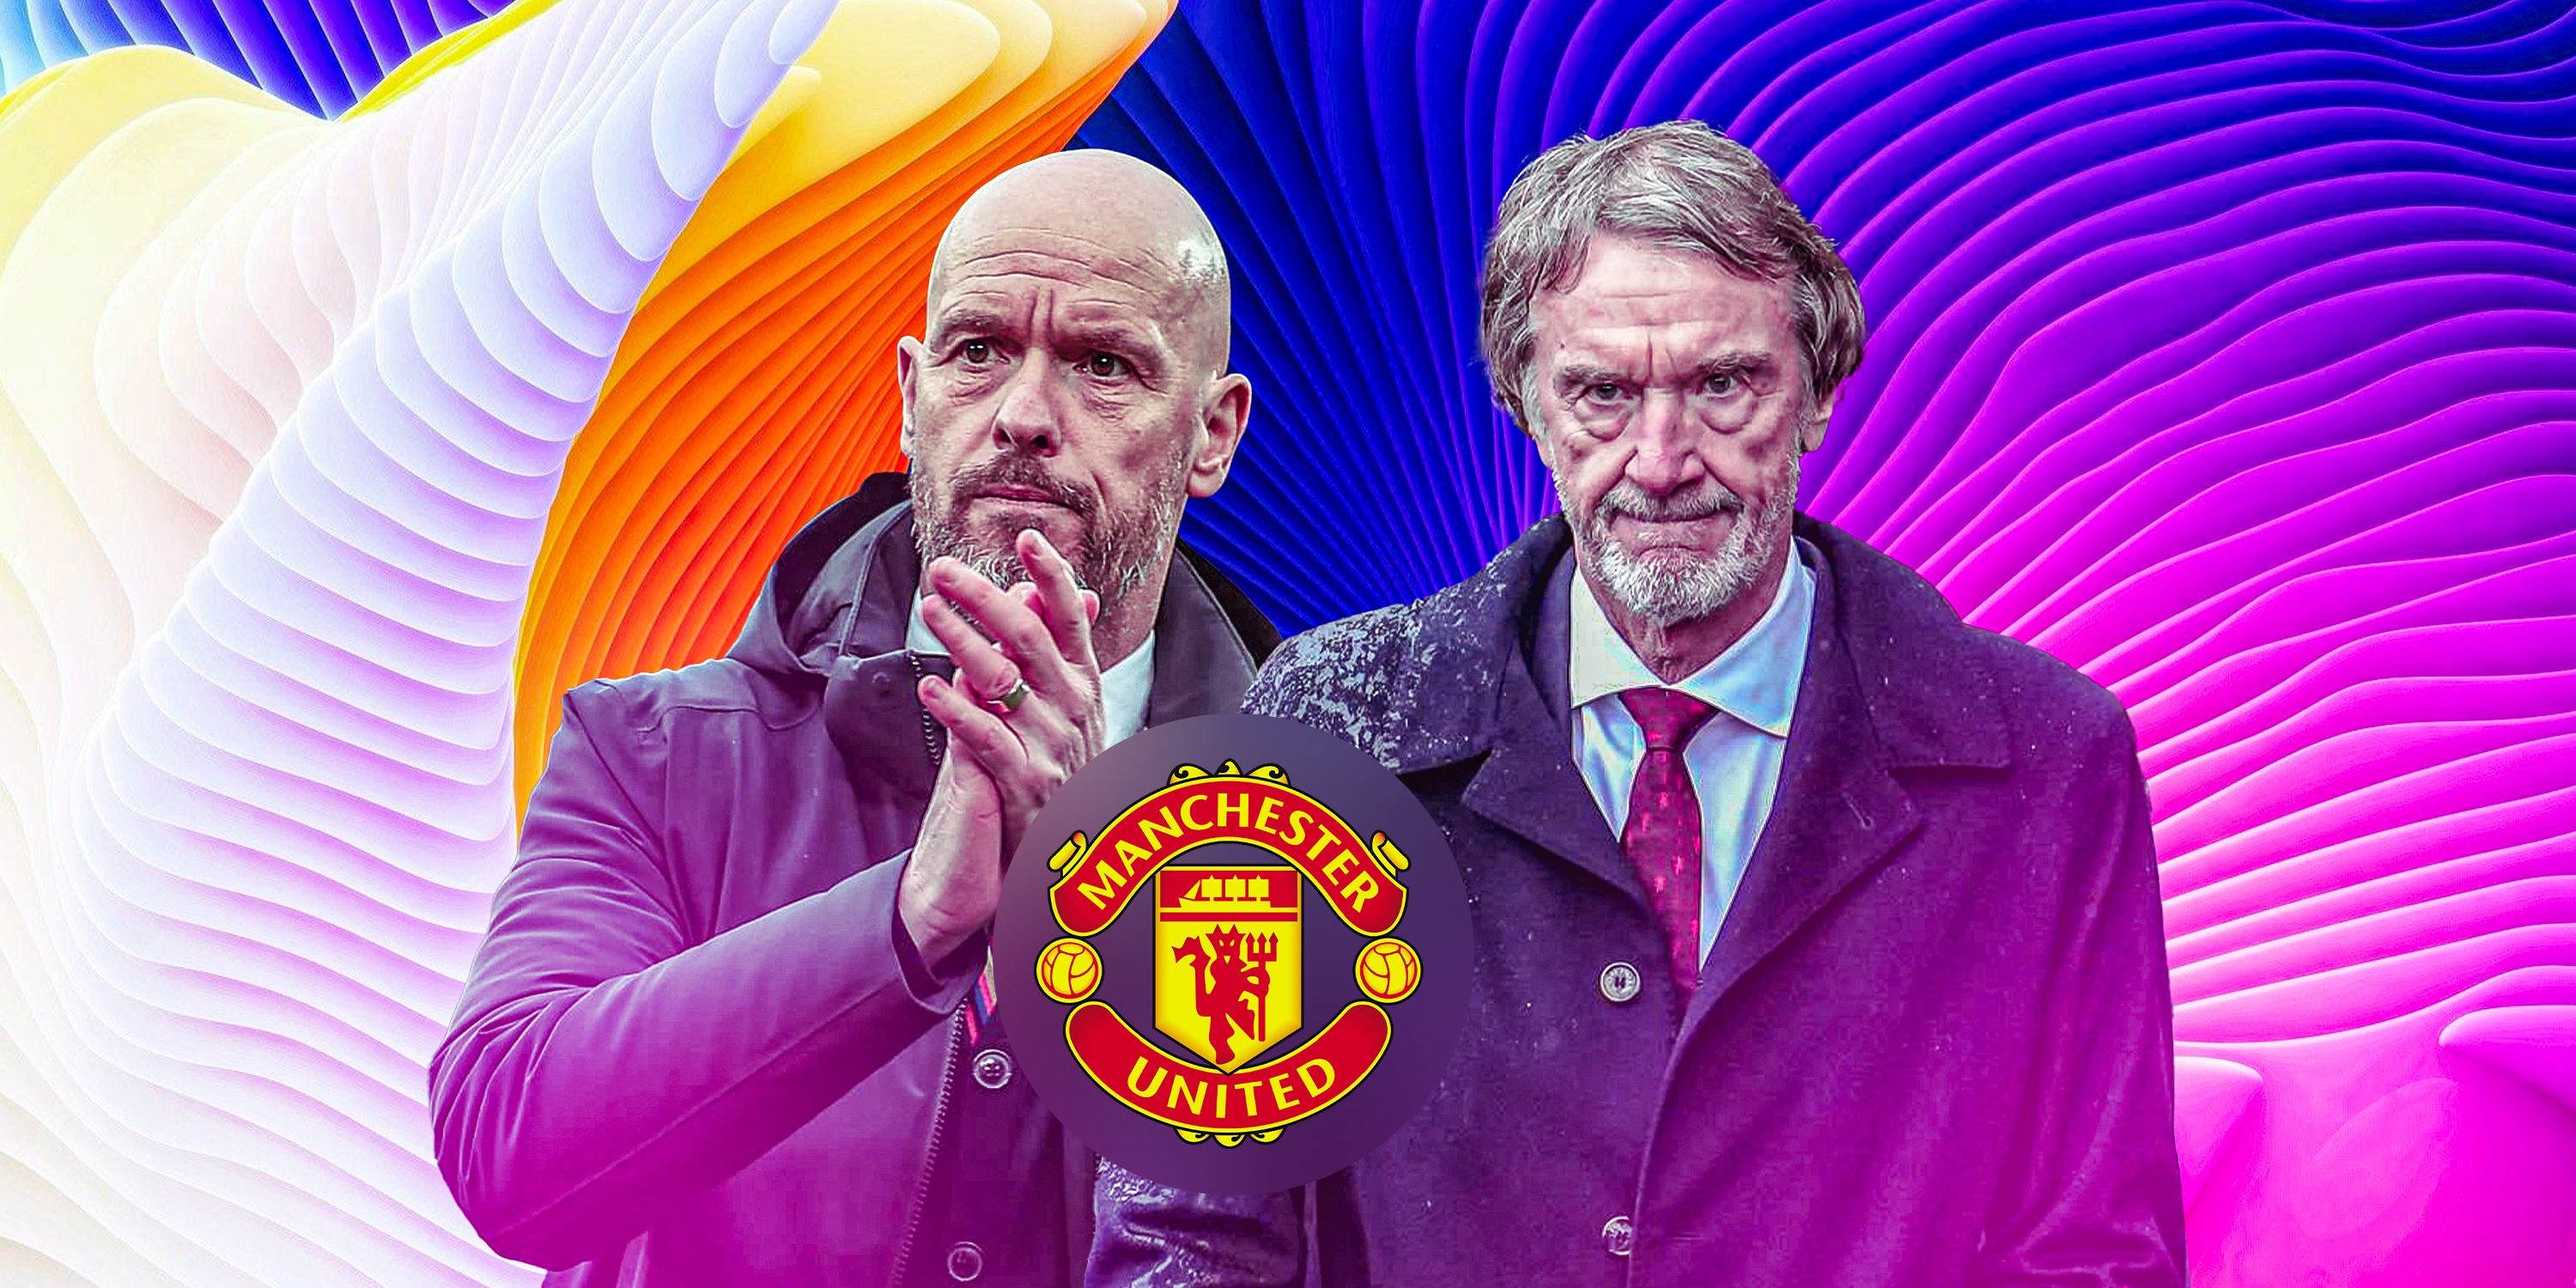 Manchester United boss Erik ten Hag applauding and Red Devils co-owner Sir Jim Ratcliffe watching on